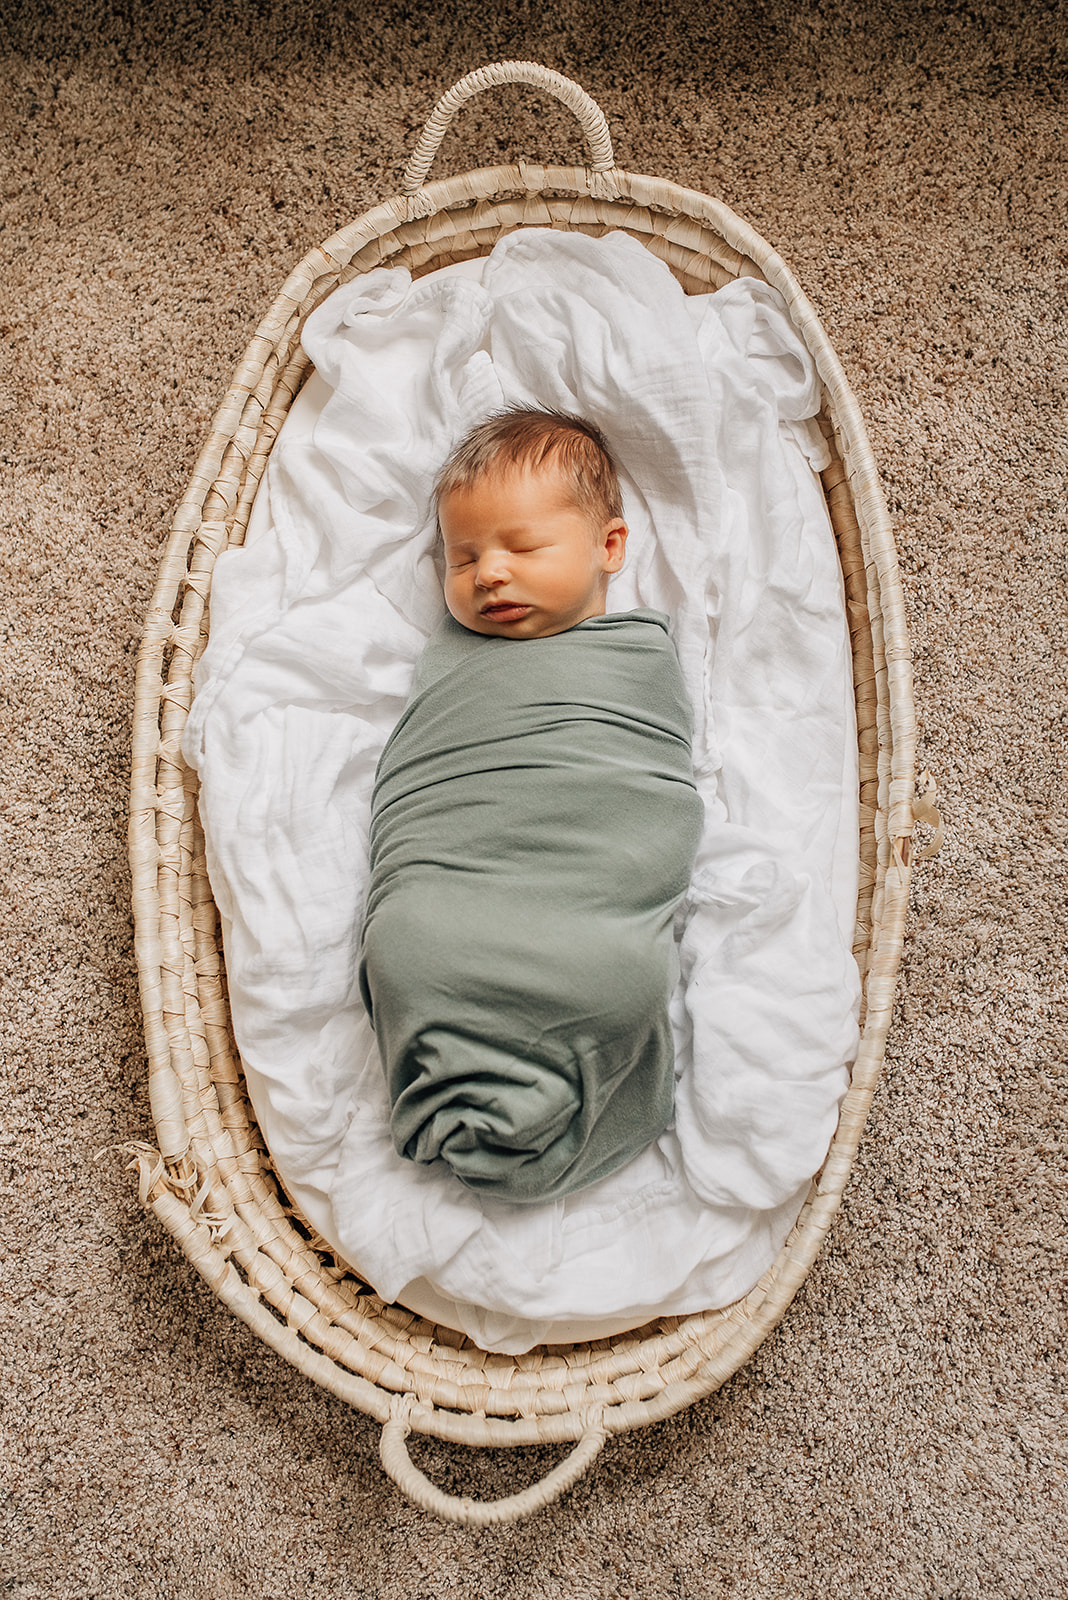 A newborn baby sleeps in a green swaddle while laying in a woven basket on the floor Cy Fair Birth Center